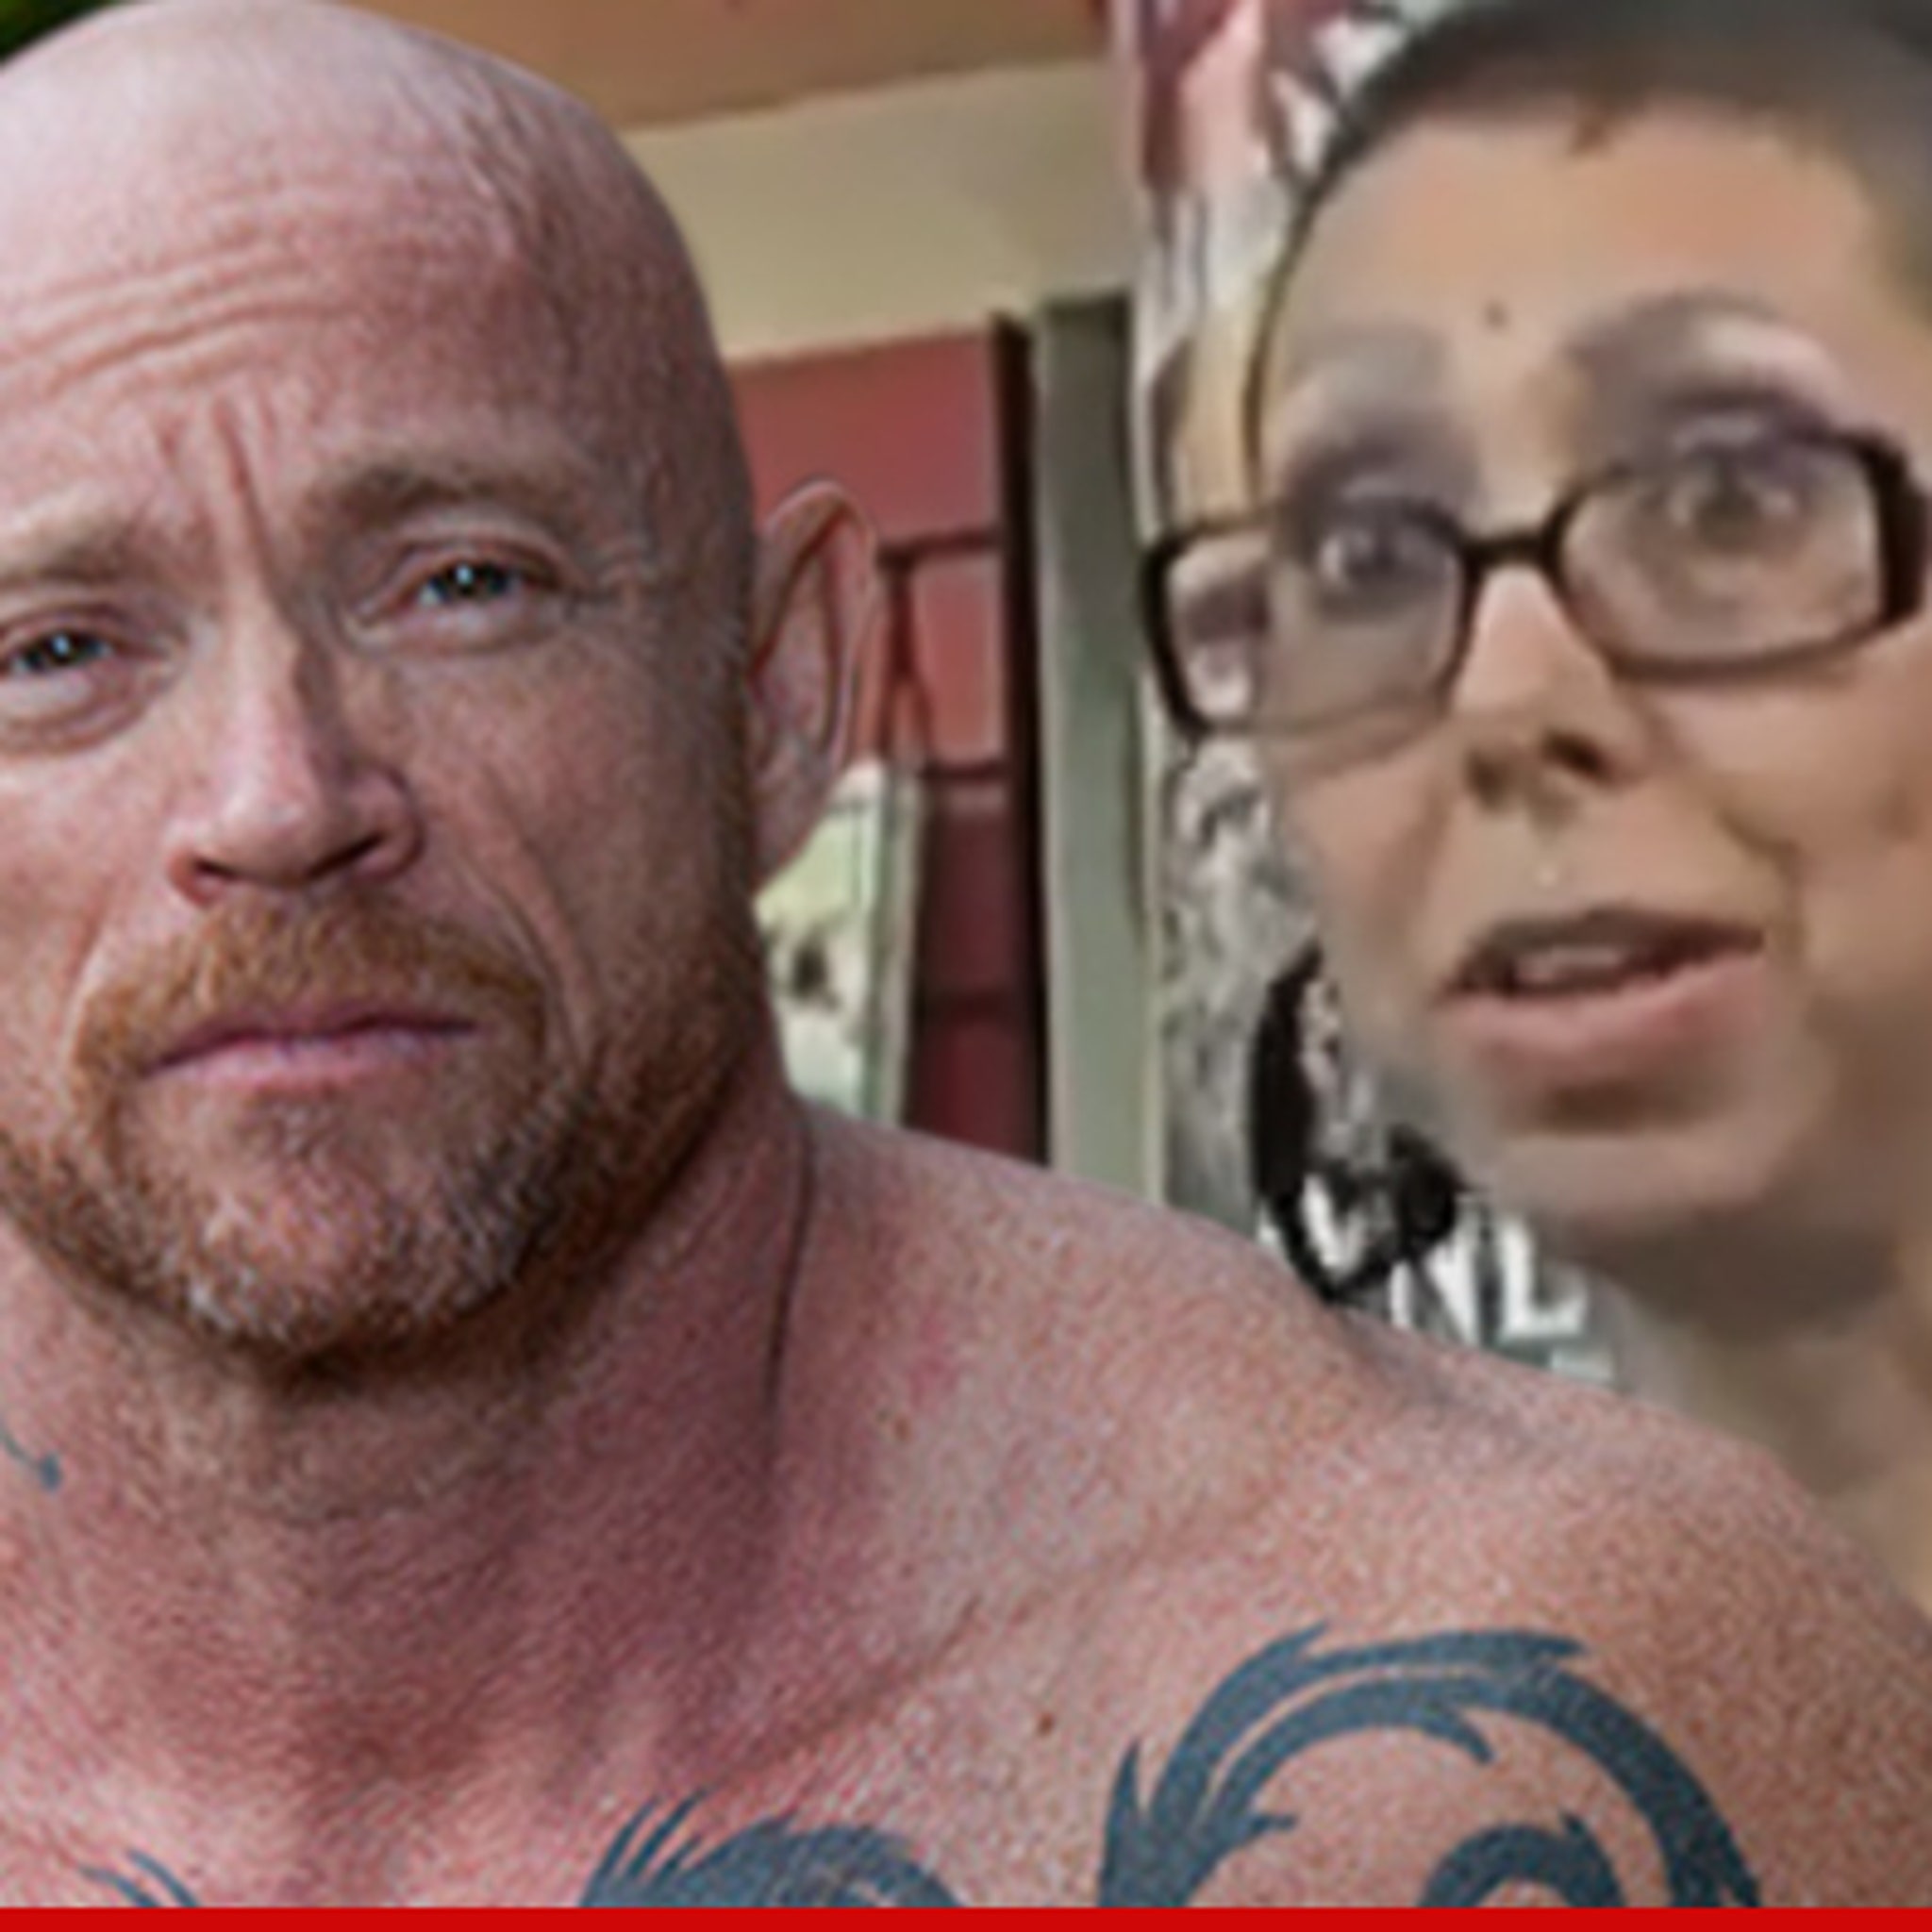 Forced Tranny Porn - Transsexual Porn Star Buck Angel -- I'm a Man, Baby! Now I Can Get Divorced